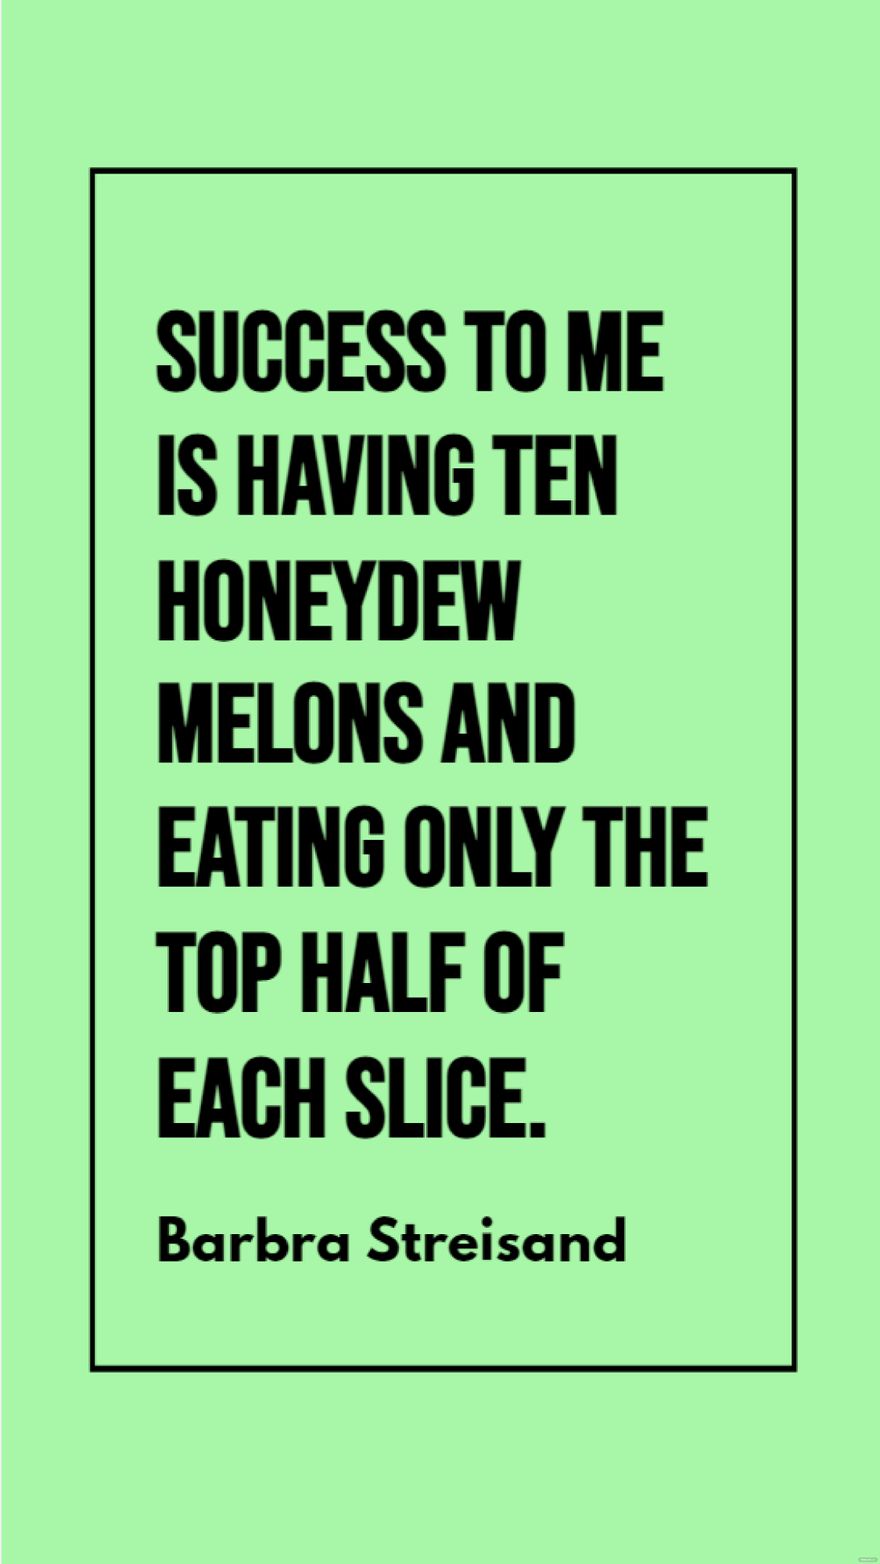 Free Barbra Streisand - Success to me is having ten honeydew melons and eating only the top half of each slice. in JPG